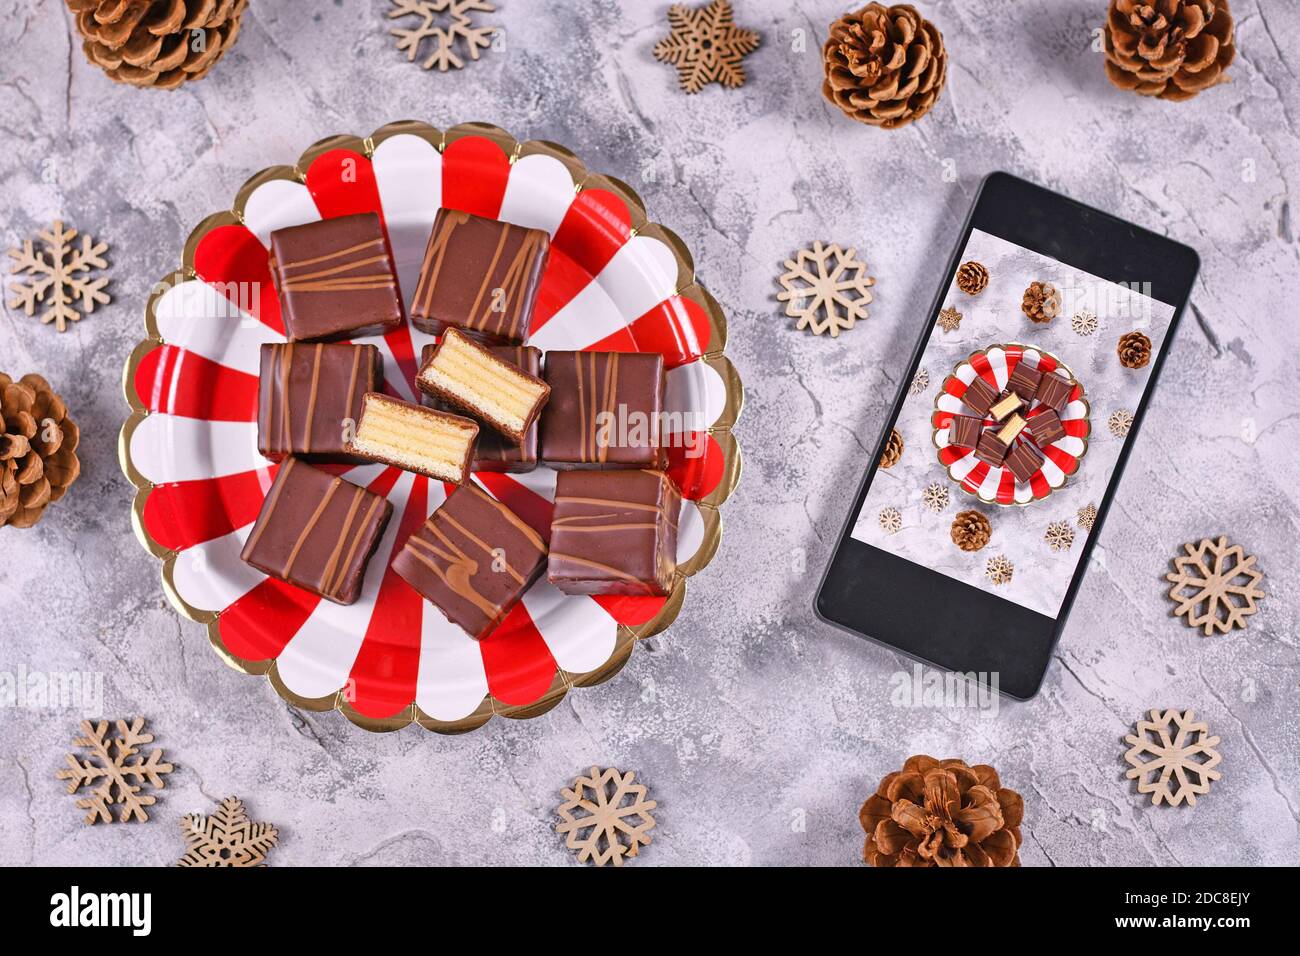 Concept for food photography with German layered winter cake pralines called 'Baumkuchen' on plate next to mobile phone with picture taken of food Stock Photo